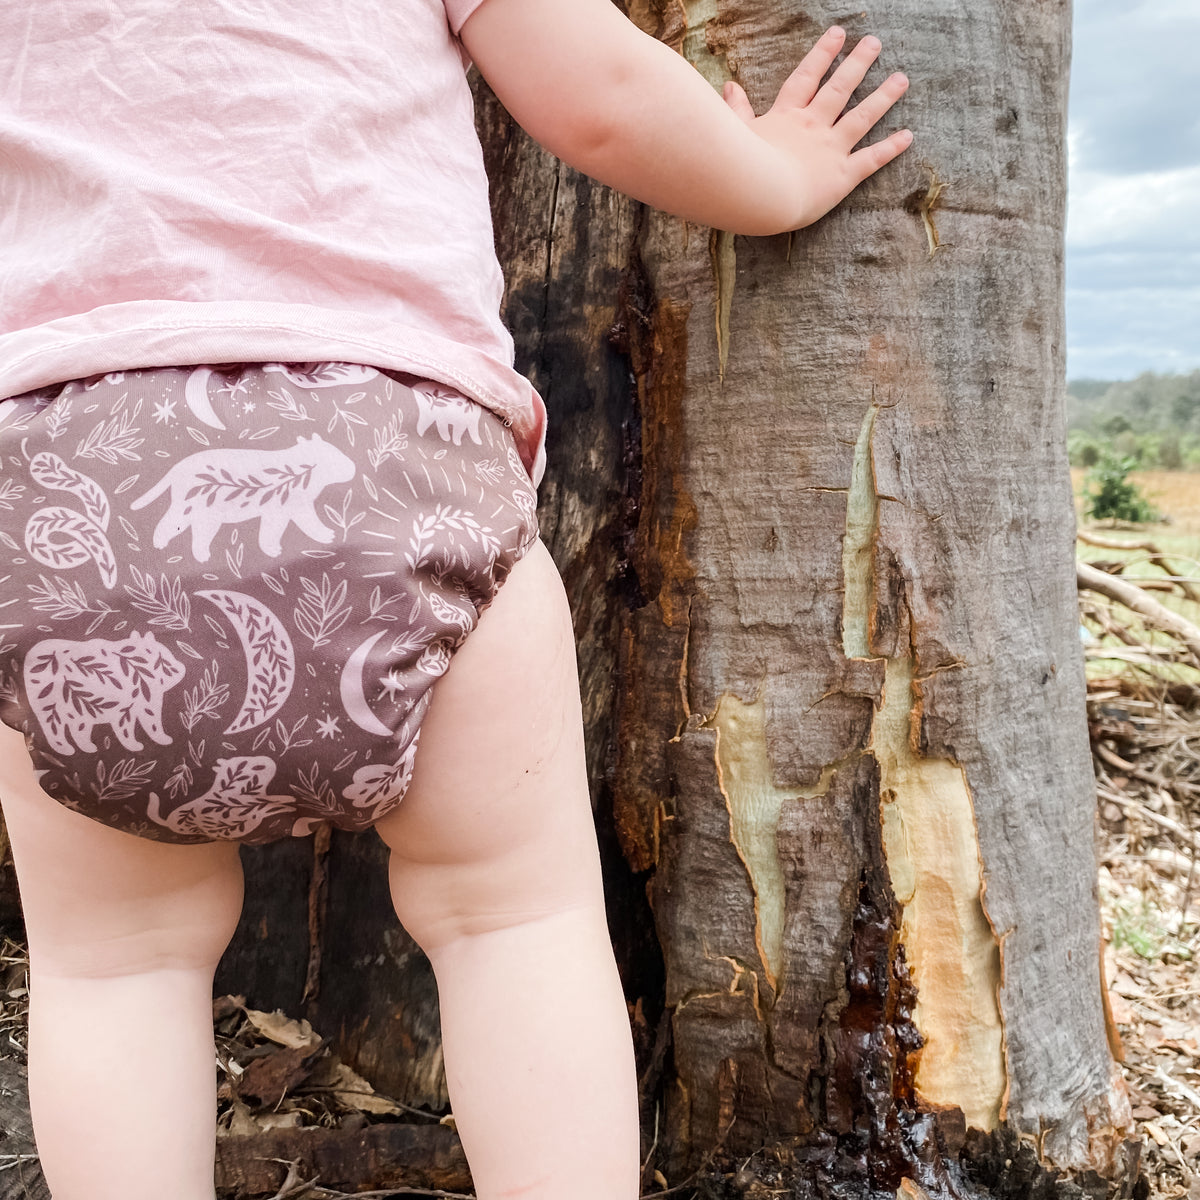 Cloth bums Australia. Try our ethically produced cloth nappies